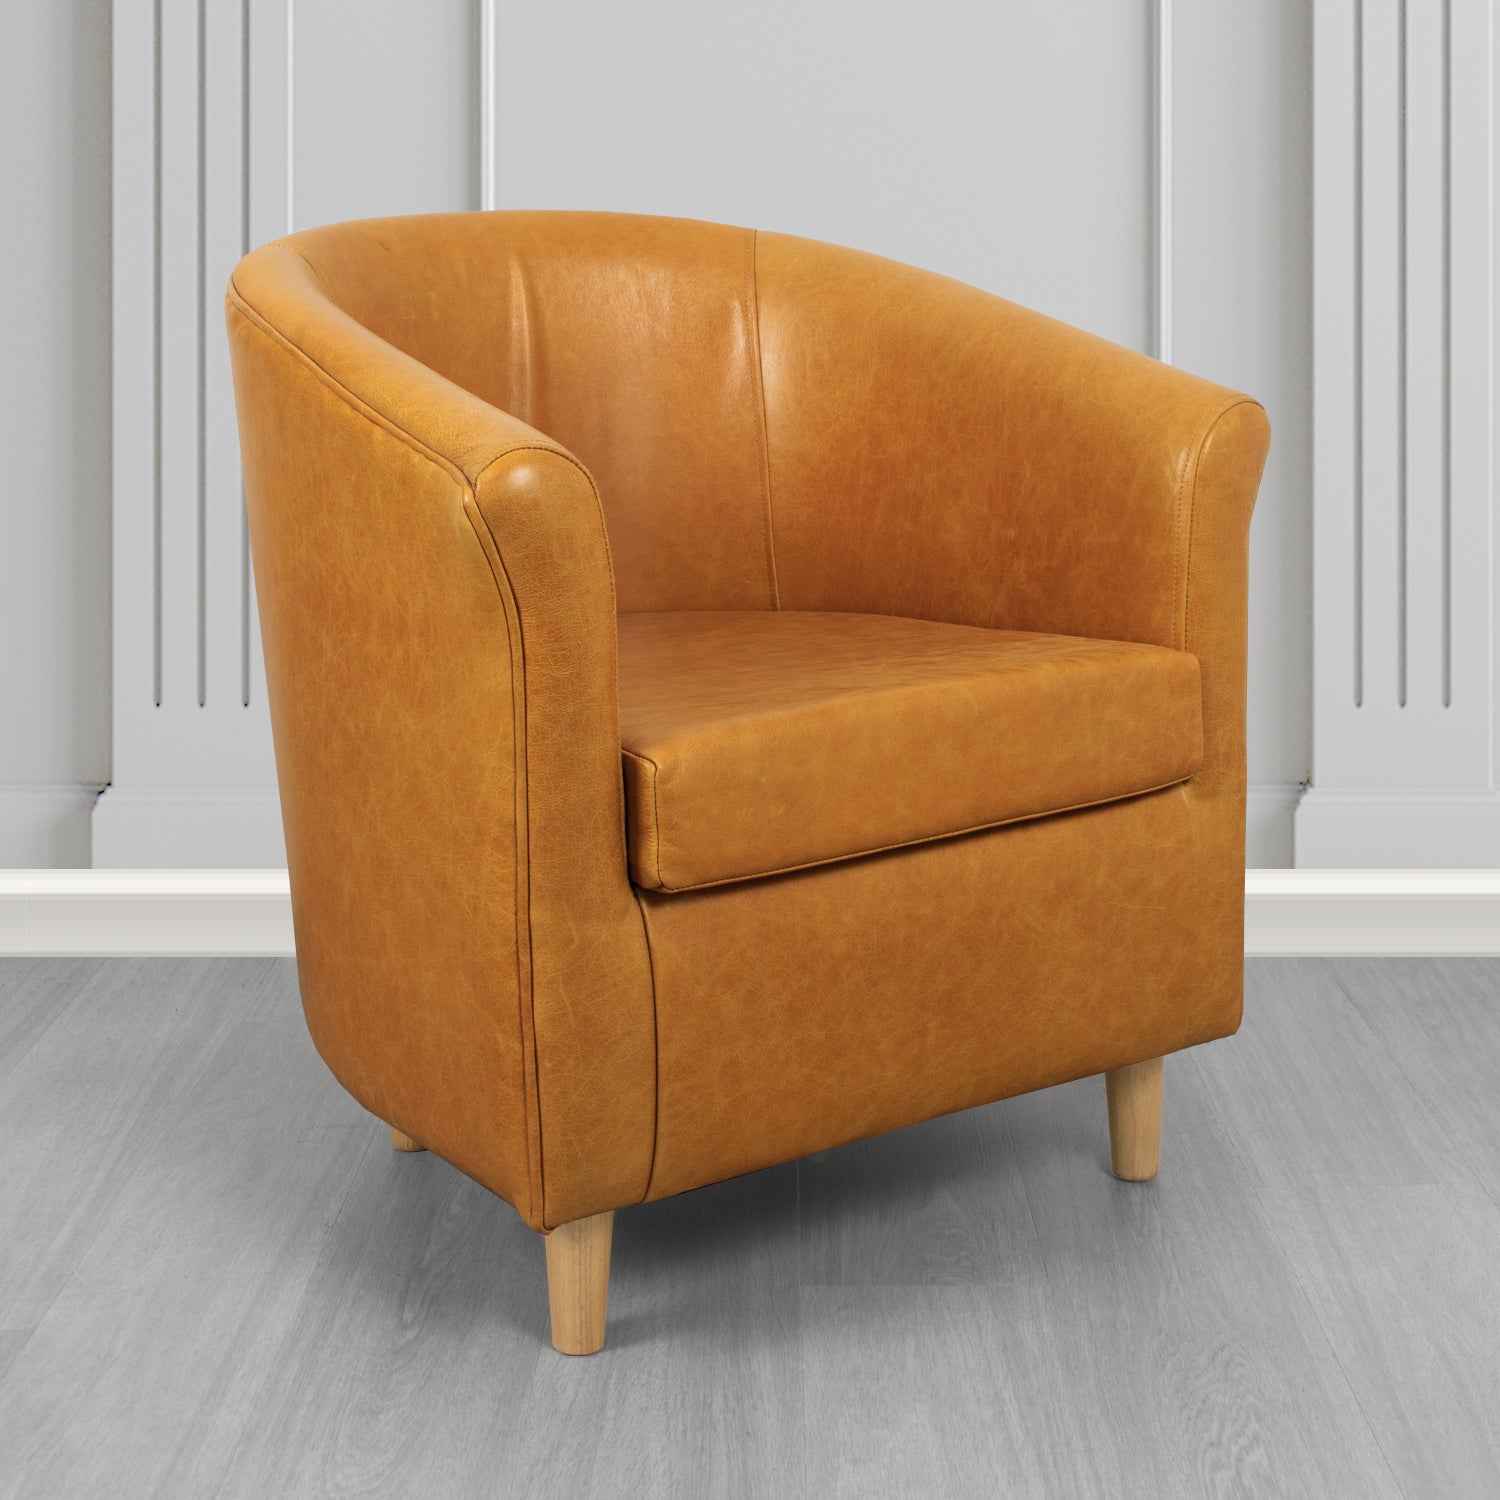 Tuscany Tub Chair in Crib 5 Old English Bruciato Genuine Leather - The Tub Chair Shop